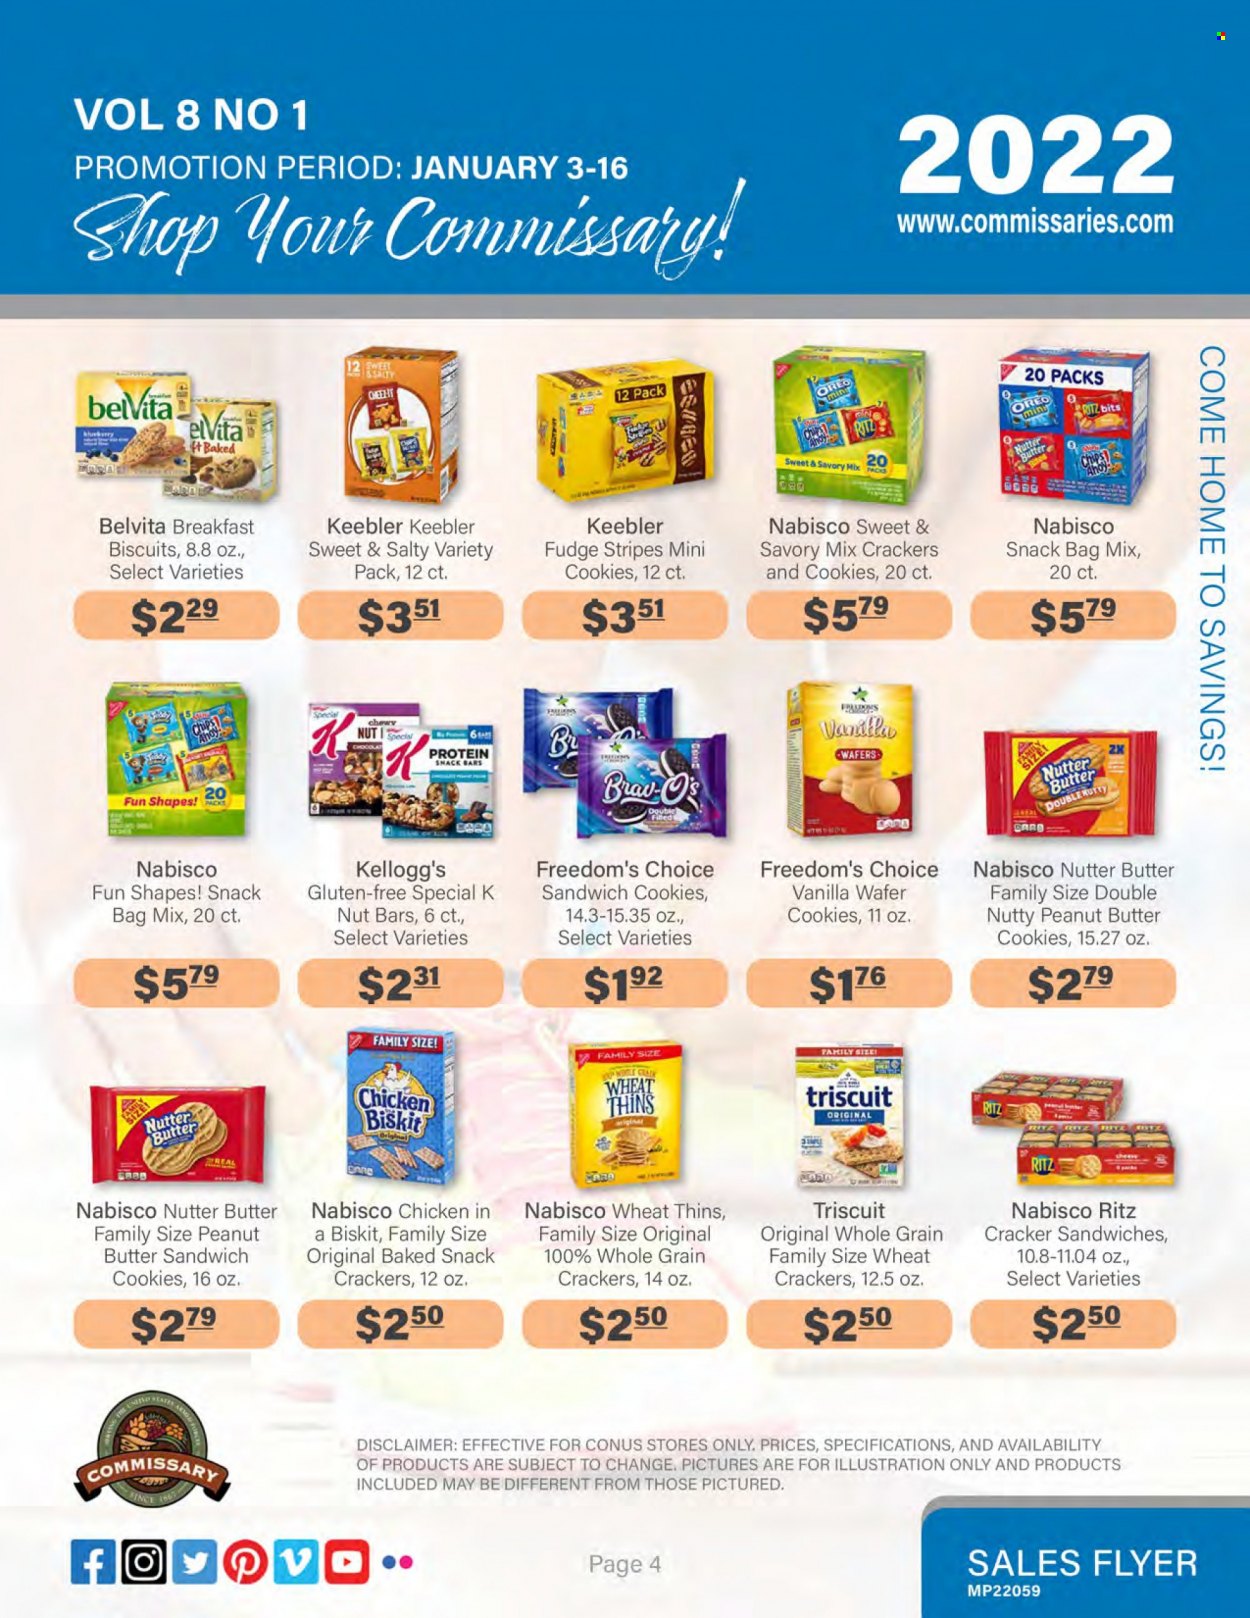 thumbnail - Commissary Flyer - 01/03/2022 - 01/16/2022 - Sales products - Oreo, cookies, fudge, sandwich cookies, wafers, butter cookies, crackers, Kellogg's, biscuit, snack bar, Keebler, RITZ, chips, Thins, nut bar, protein snack, belVita, bag. Page 4.